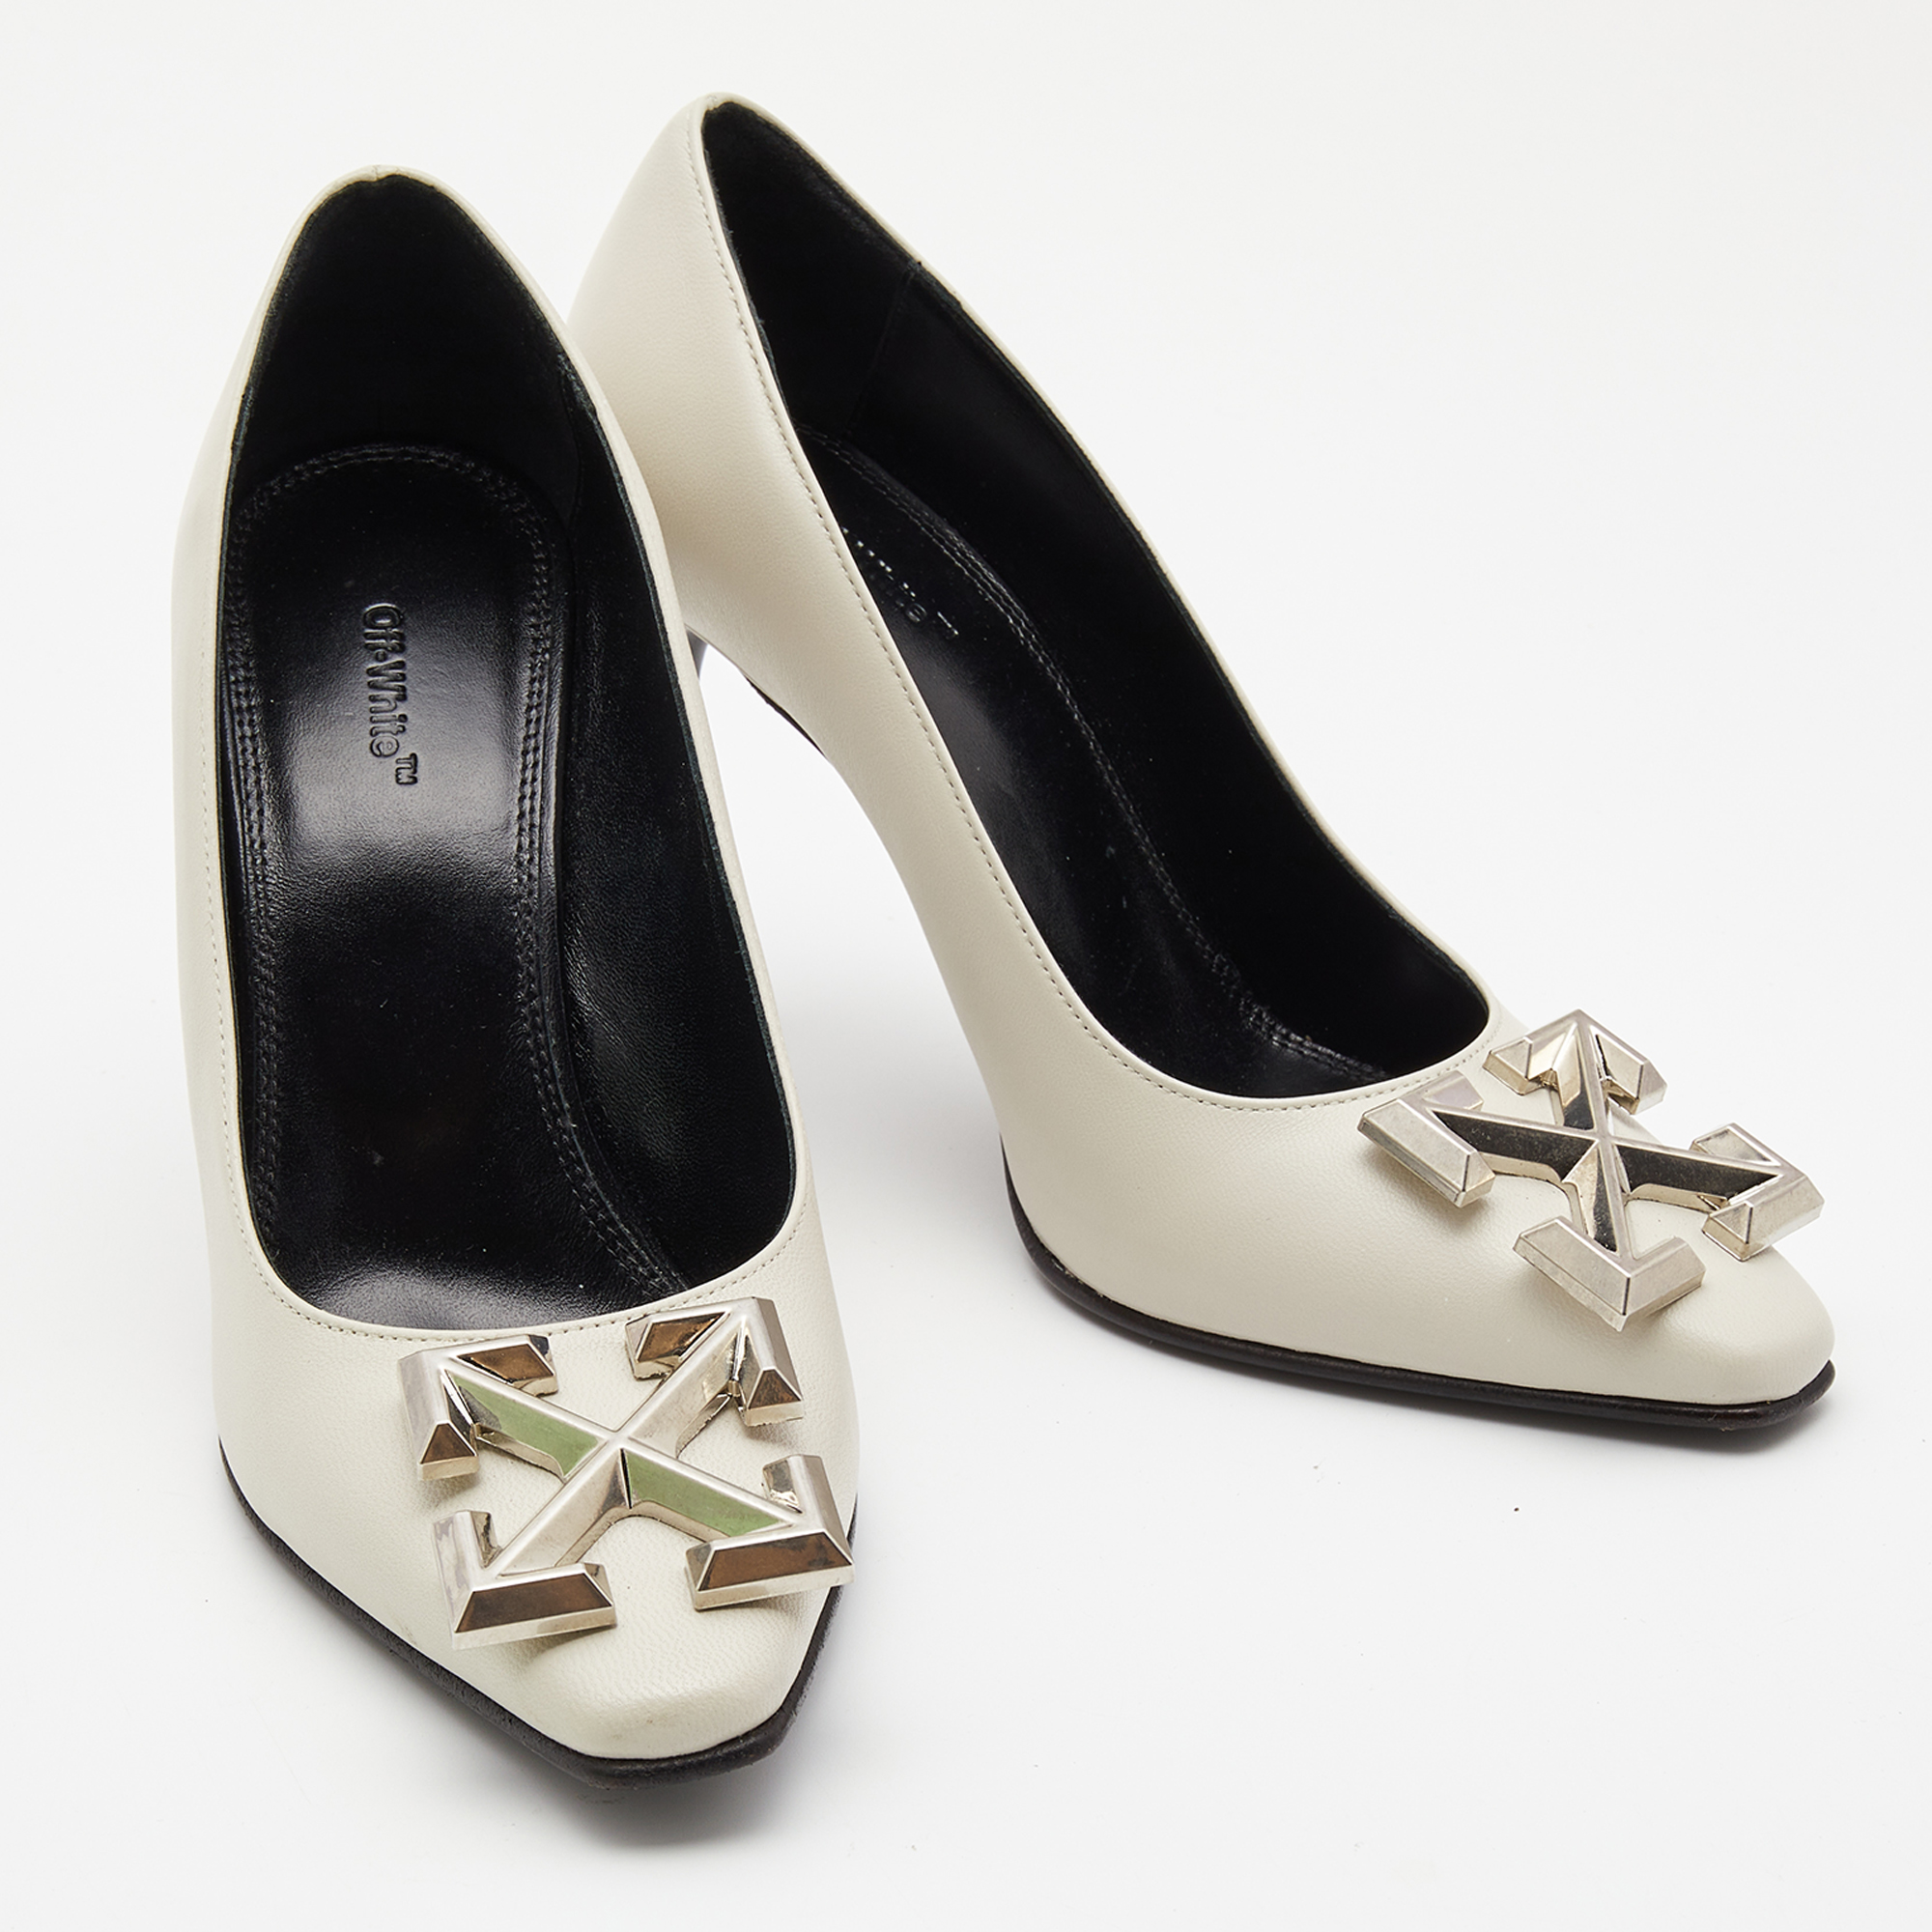 Off-White Cream Leather Arrow Embellished Pumps Size 36